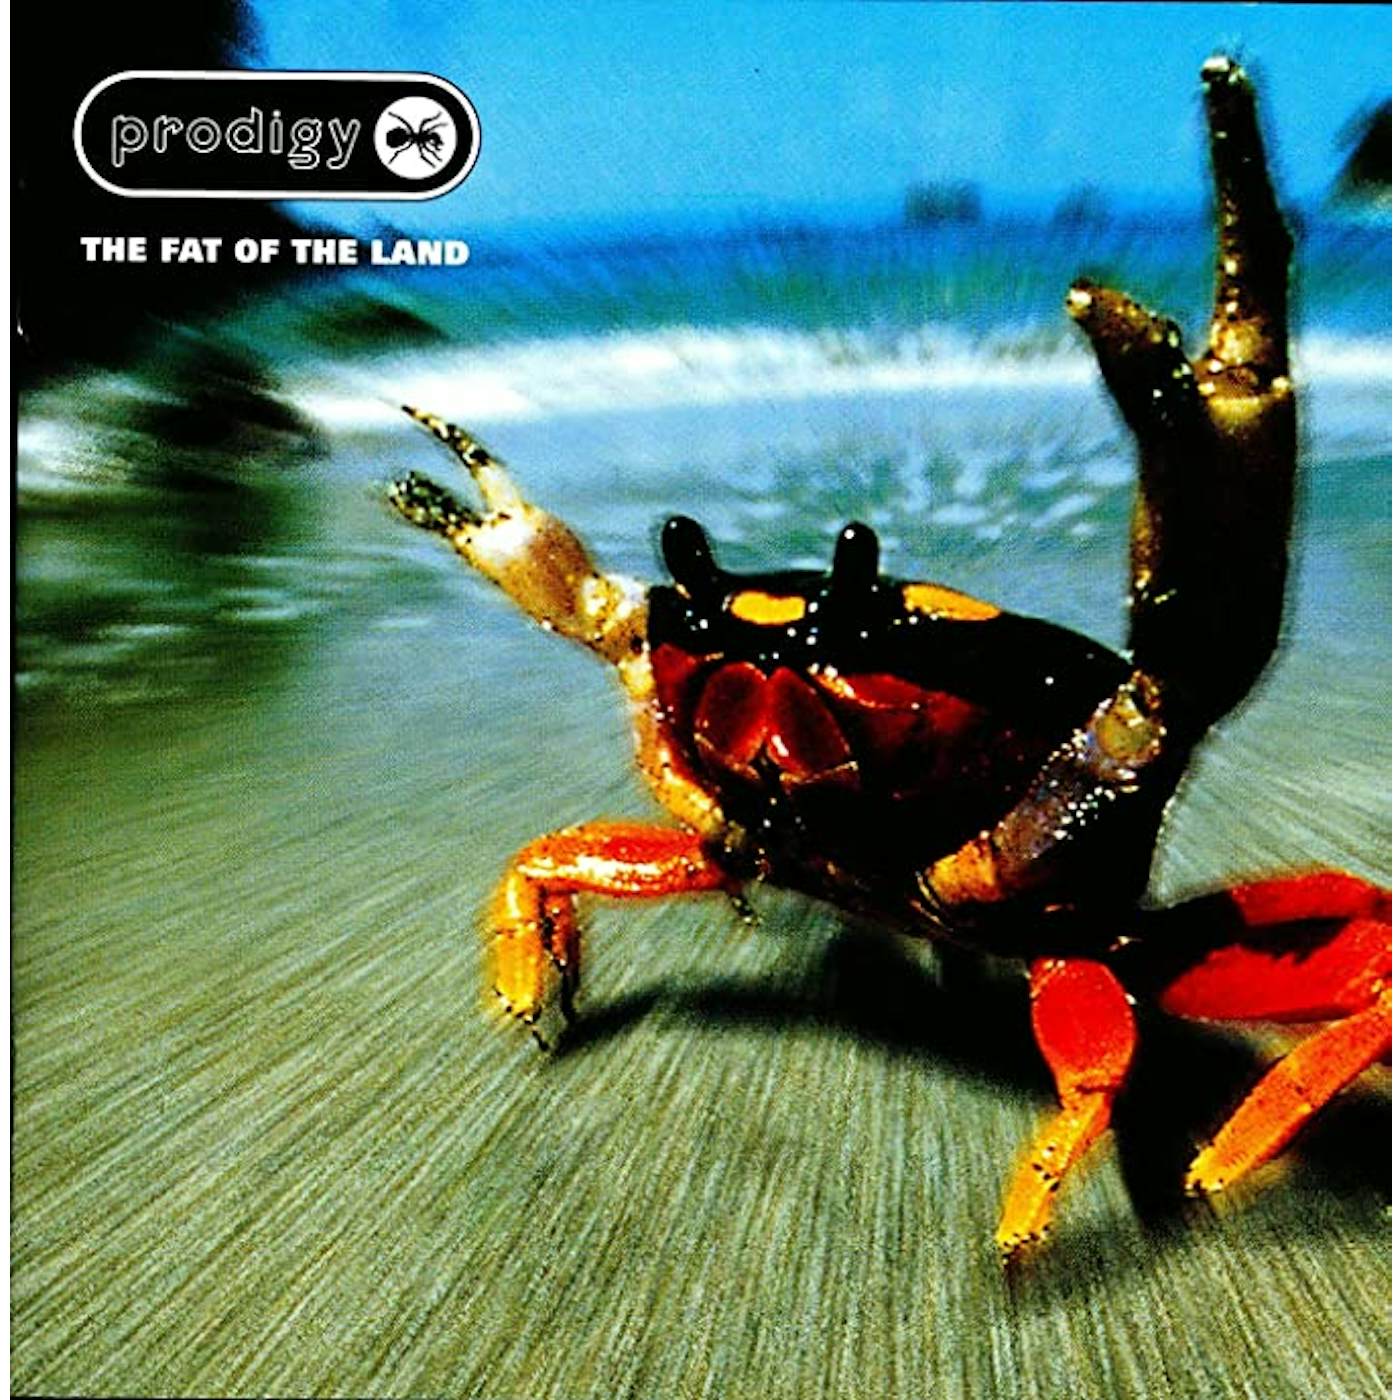 The Prodigy - Fat of the Land